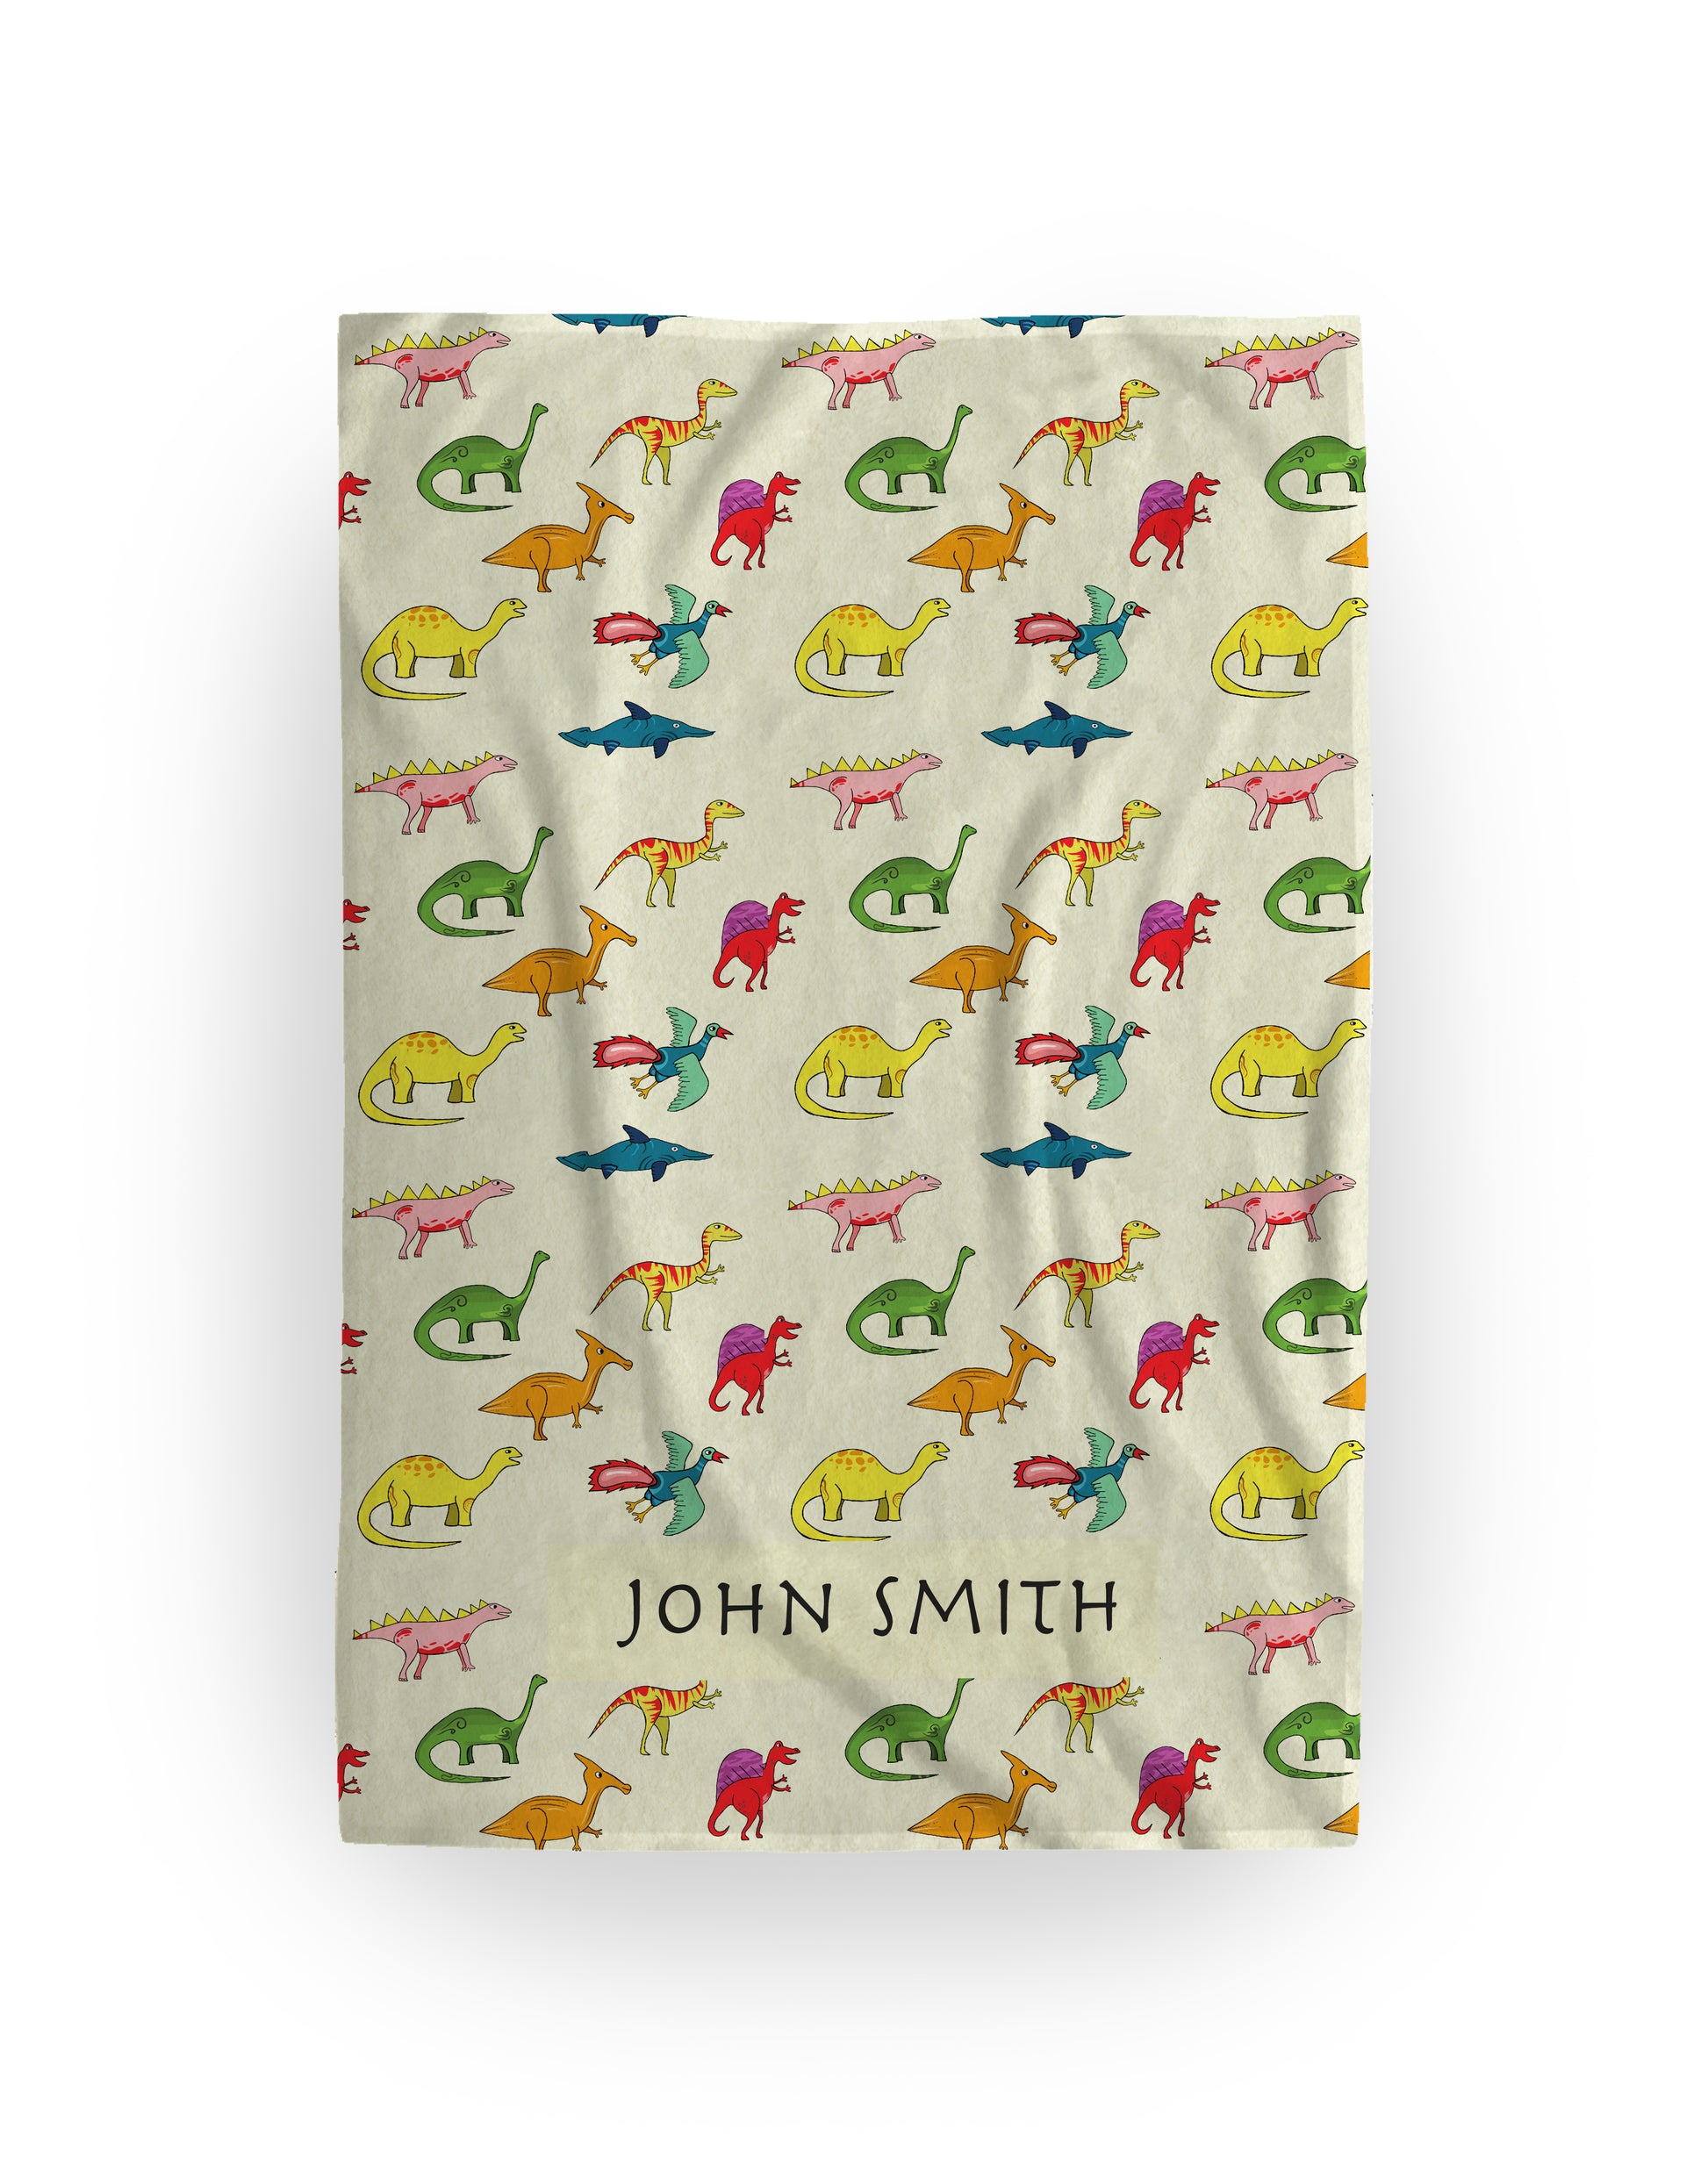 personalised fleece blanket for kids. dinosaurs images and name